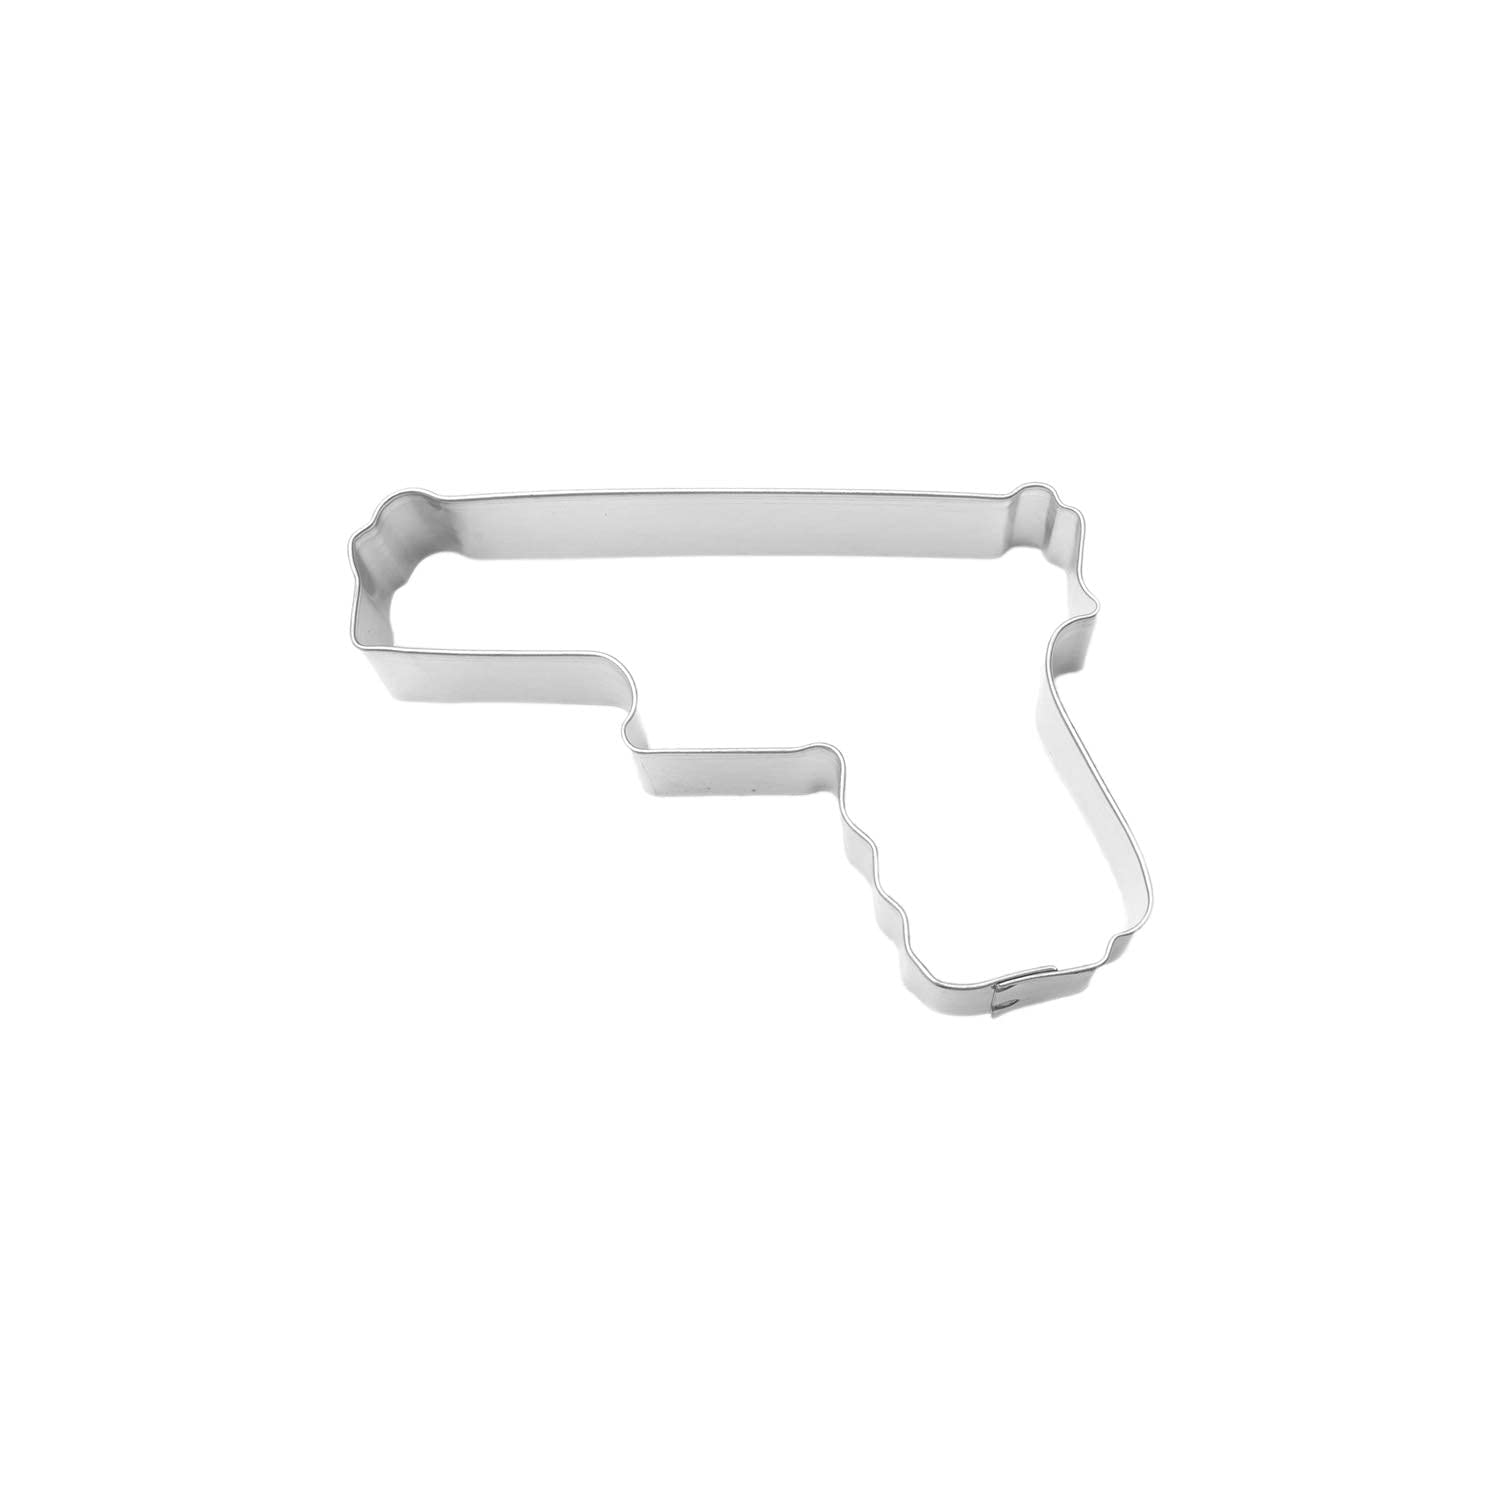 Hand Gun 4 Inch Cookie Cutter from The Cookie Cutter Shop – Tin Plated Steel Cookie Cutter